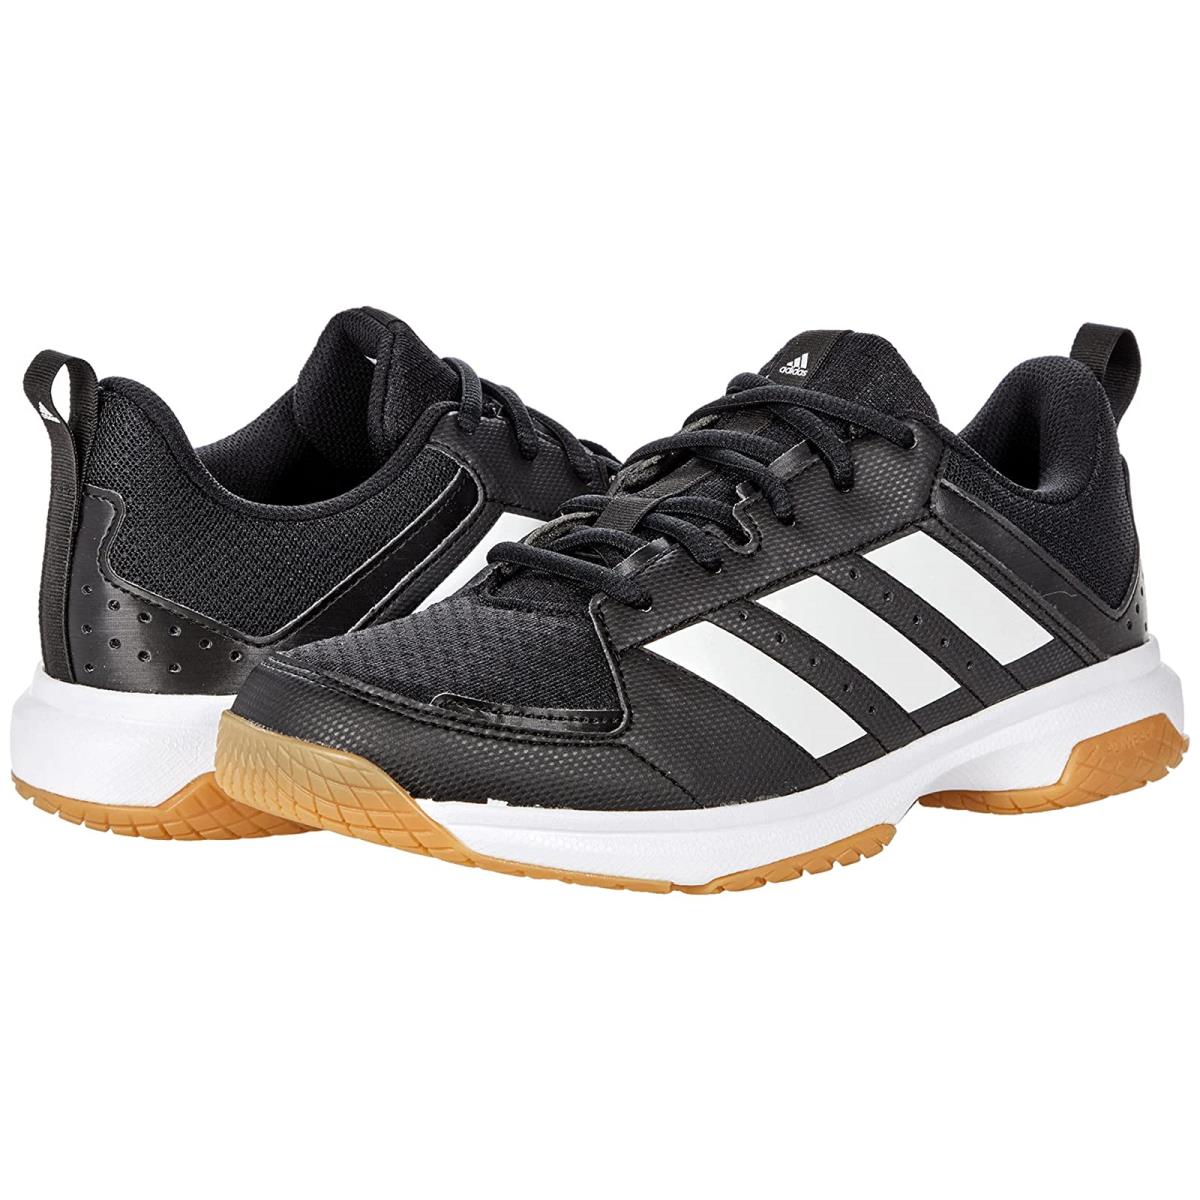 Woman`s Sneakers Athletic Shoes Adidas Ligra 7 Volleyball Shoes Black/White/Black